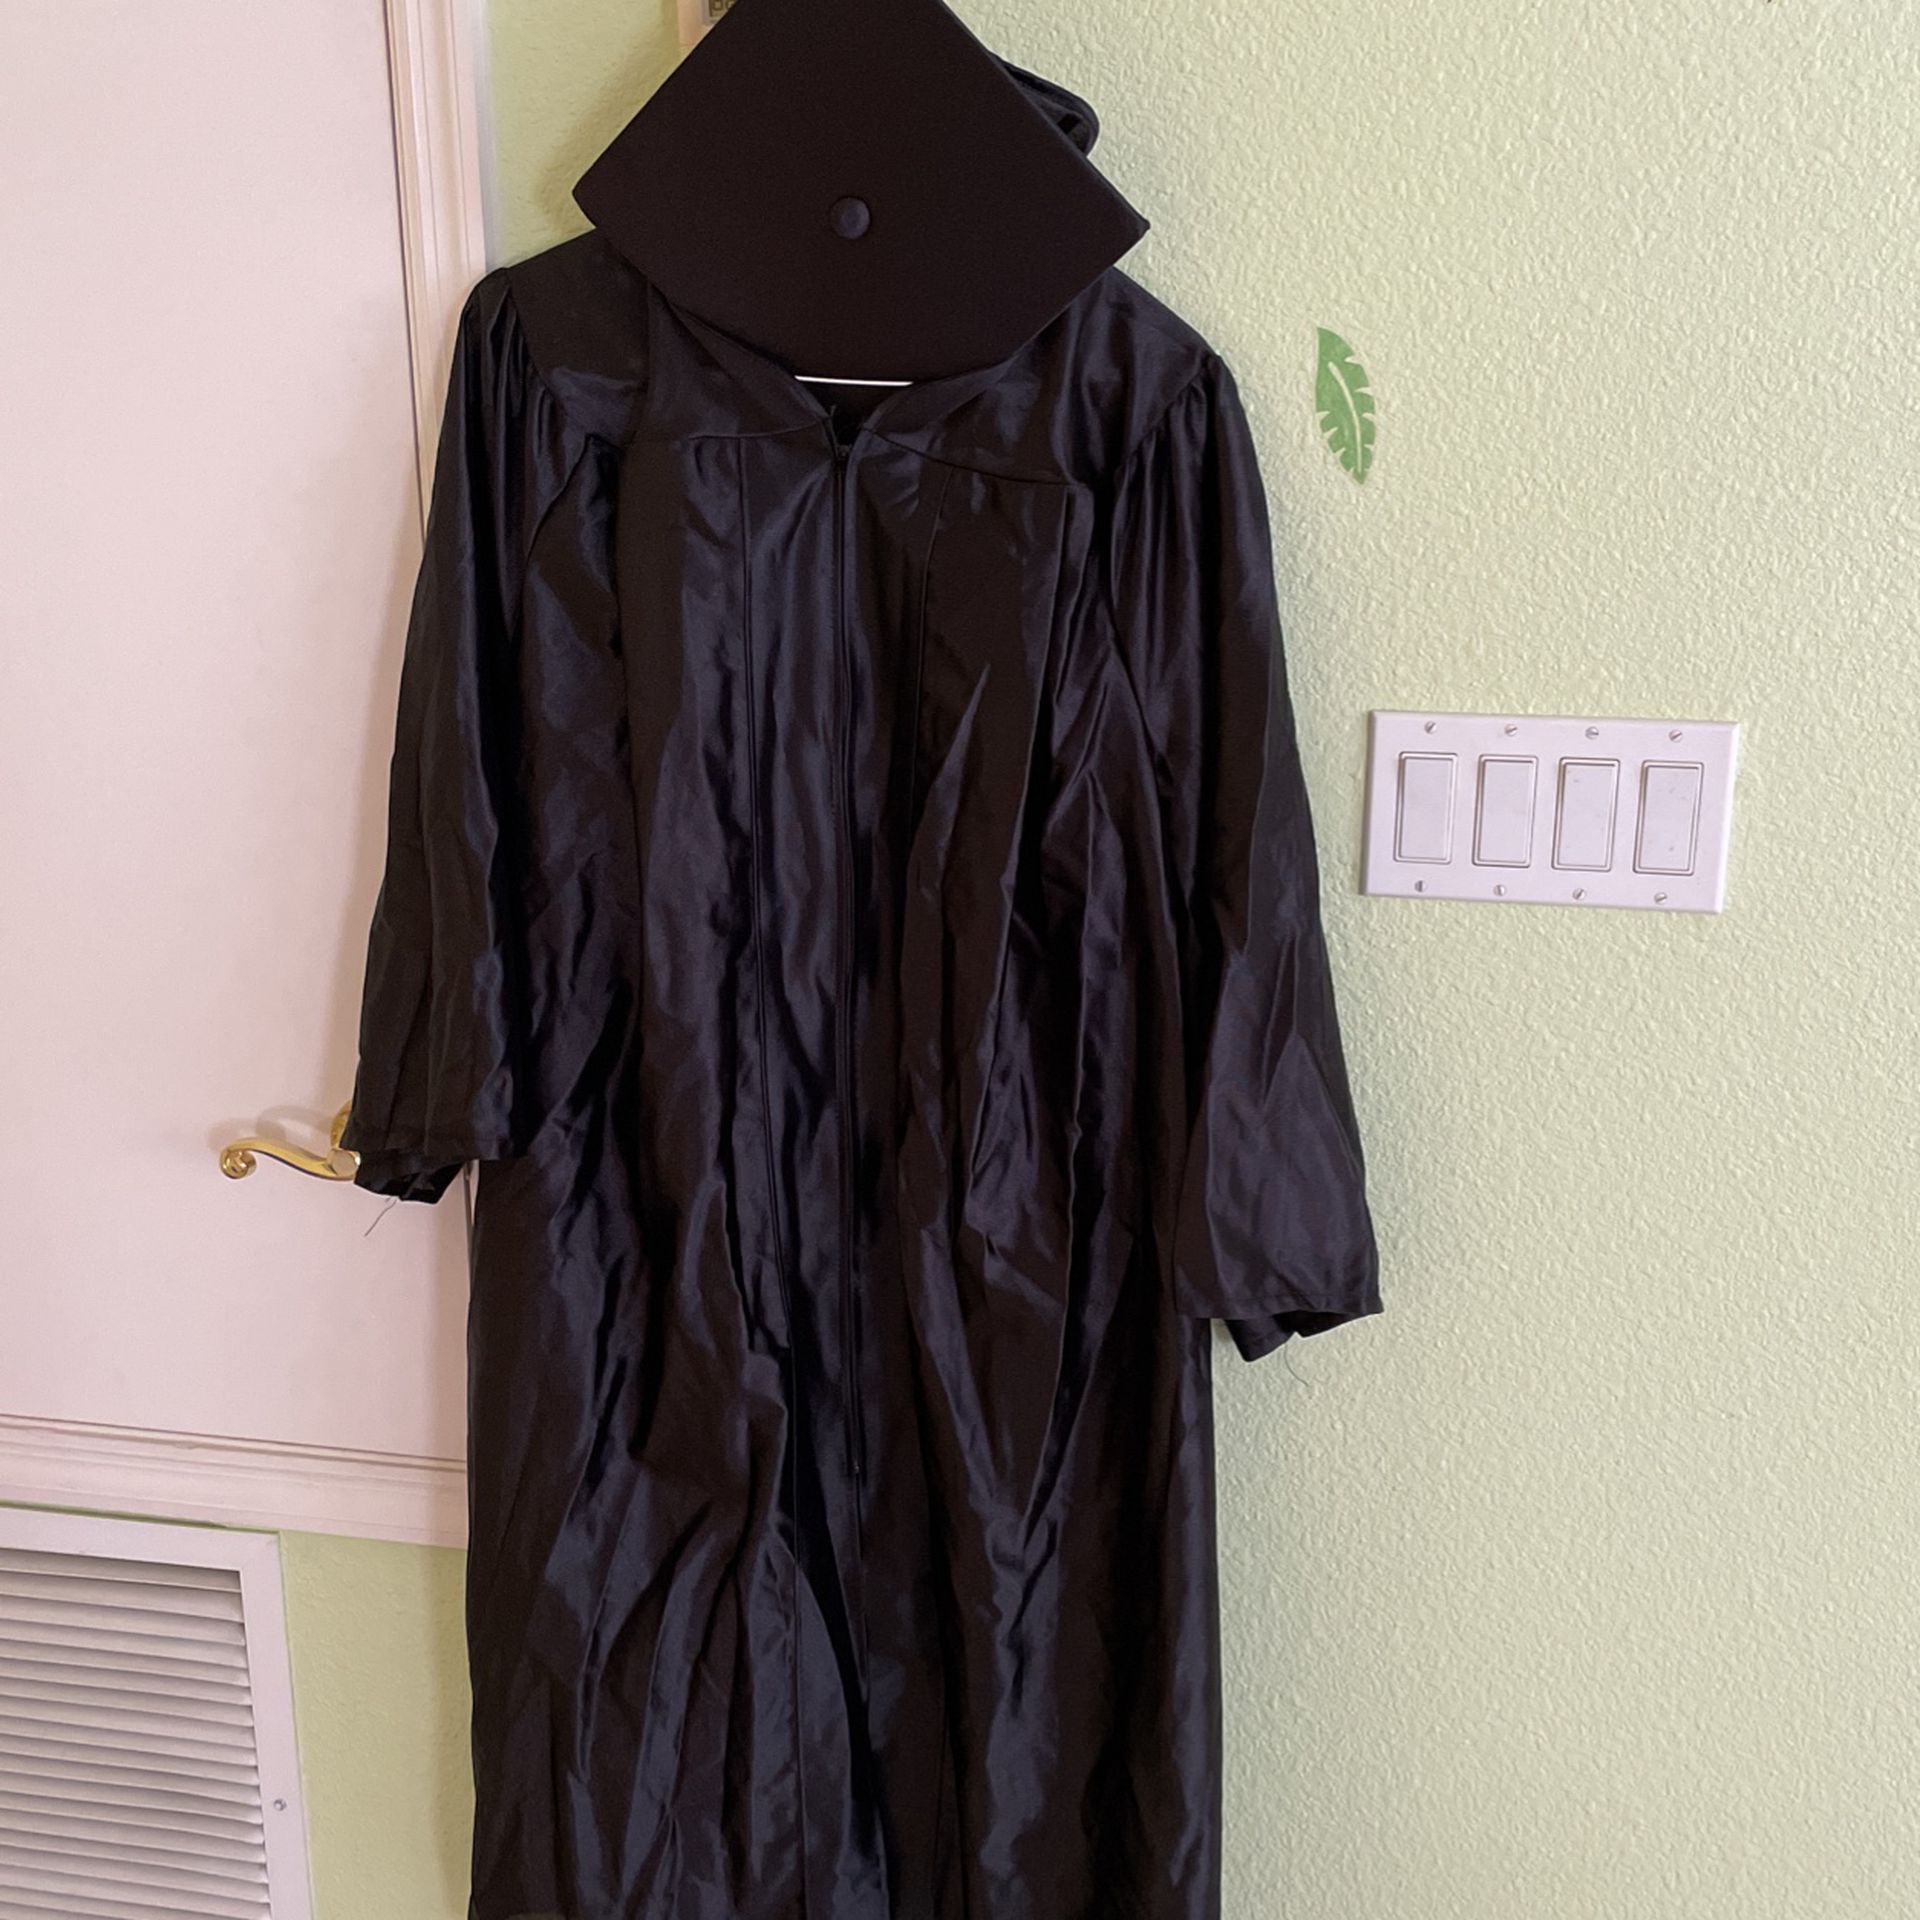 Cap And Gown